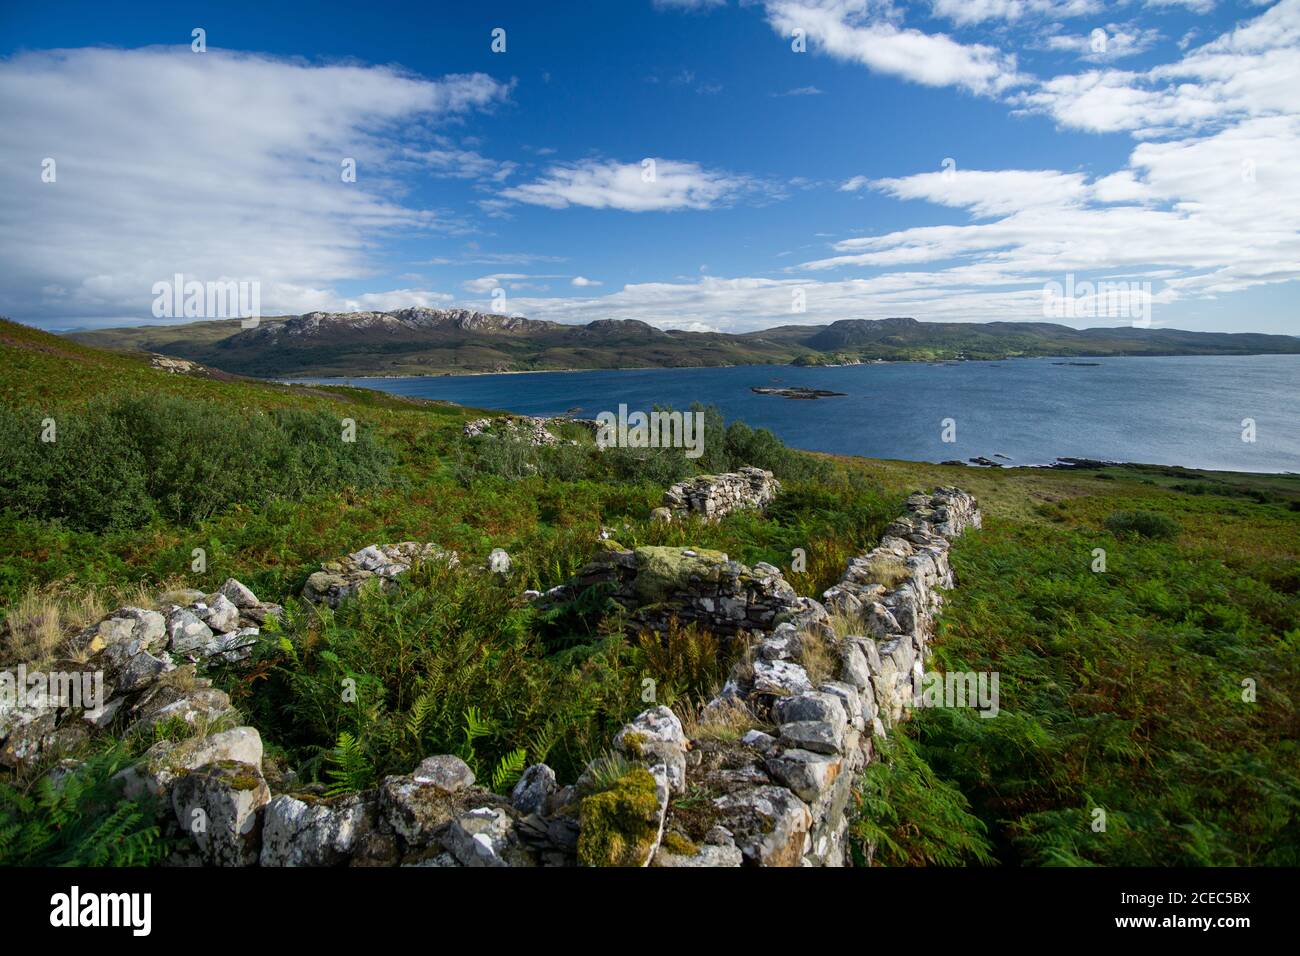 Abandoned township of Boreraig in the Isle of Skye on the north shore of Loch Eishort of the west coast of the Scottish mainland. Stock Photo